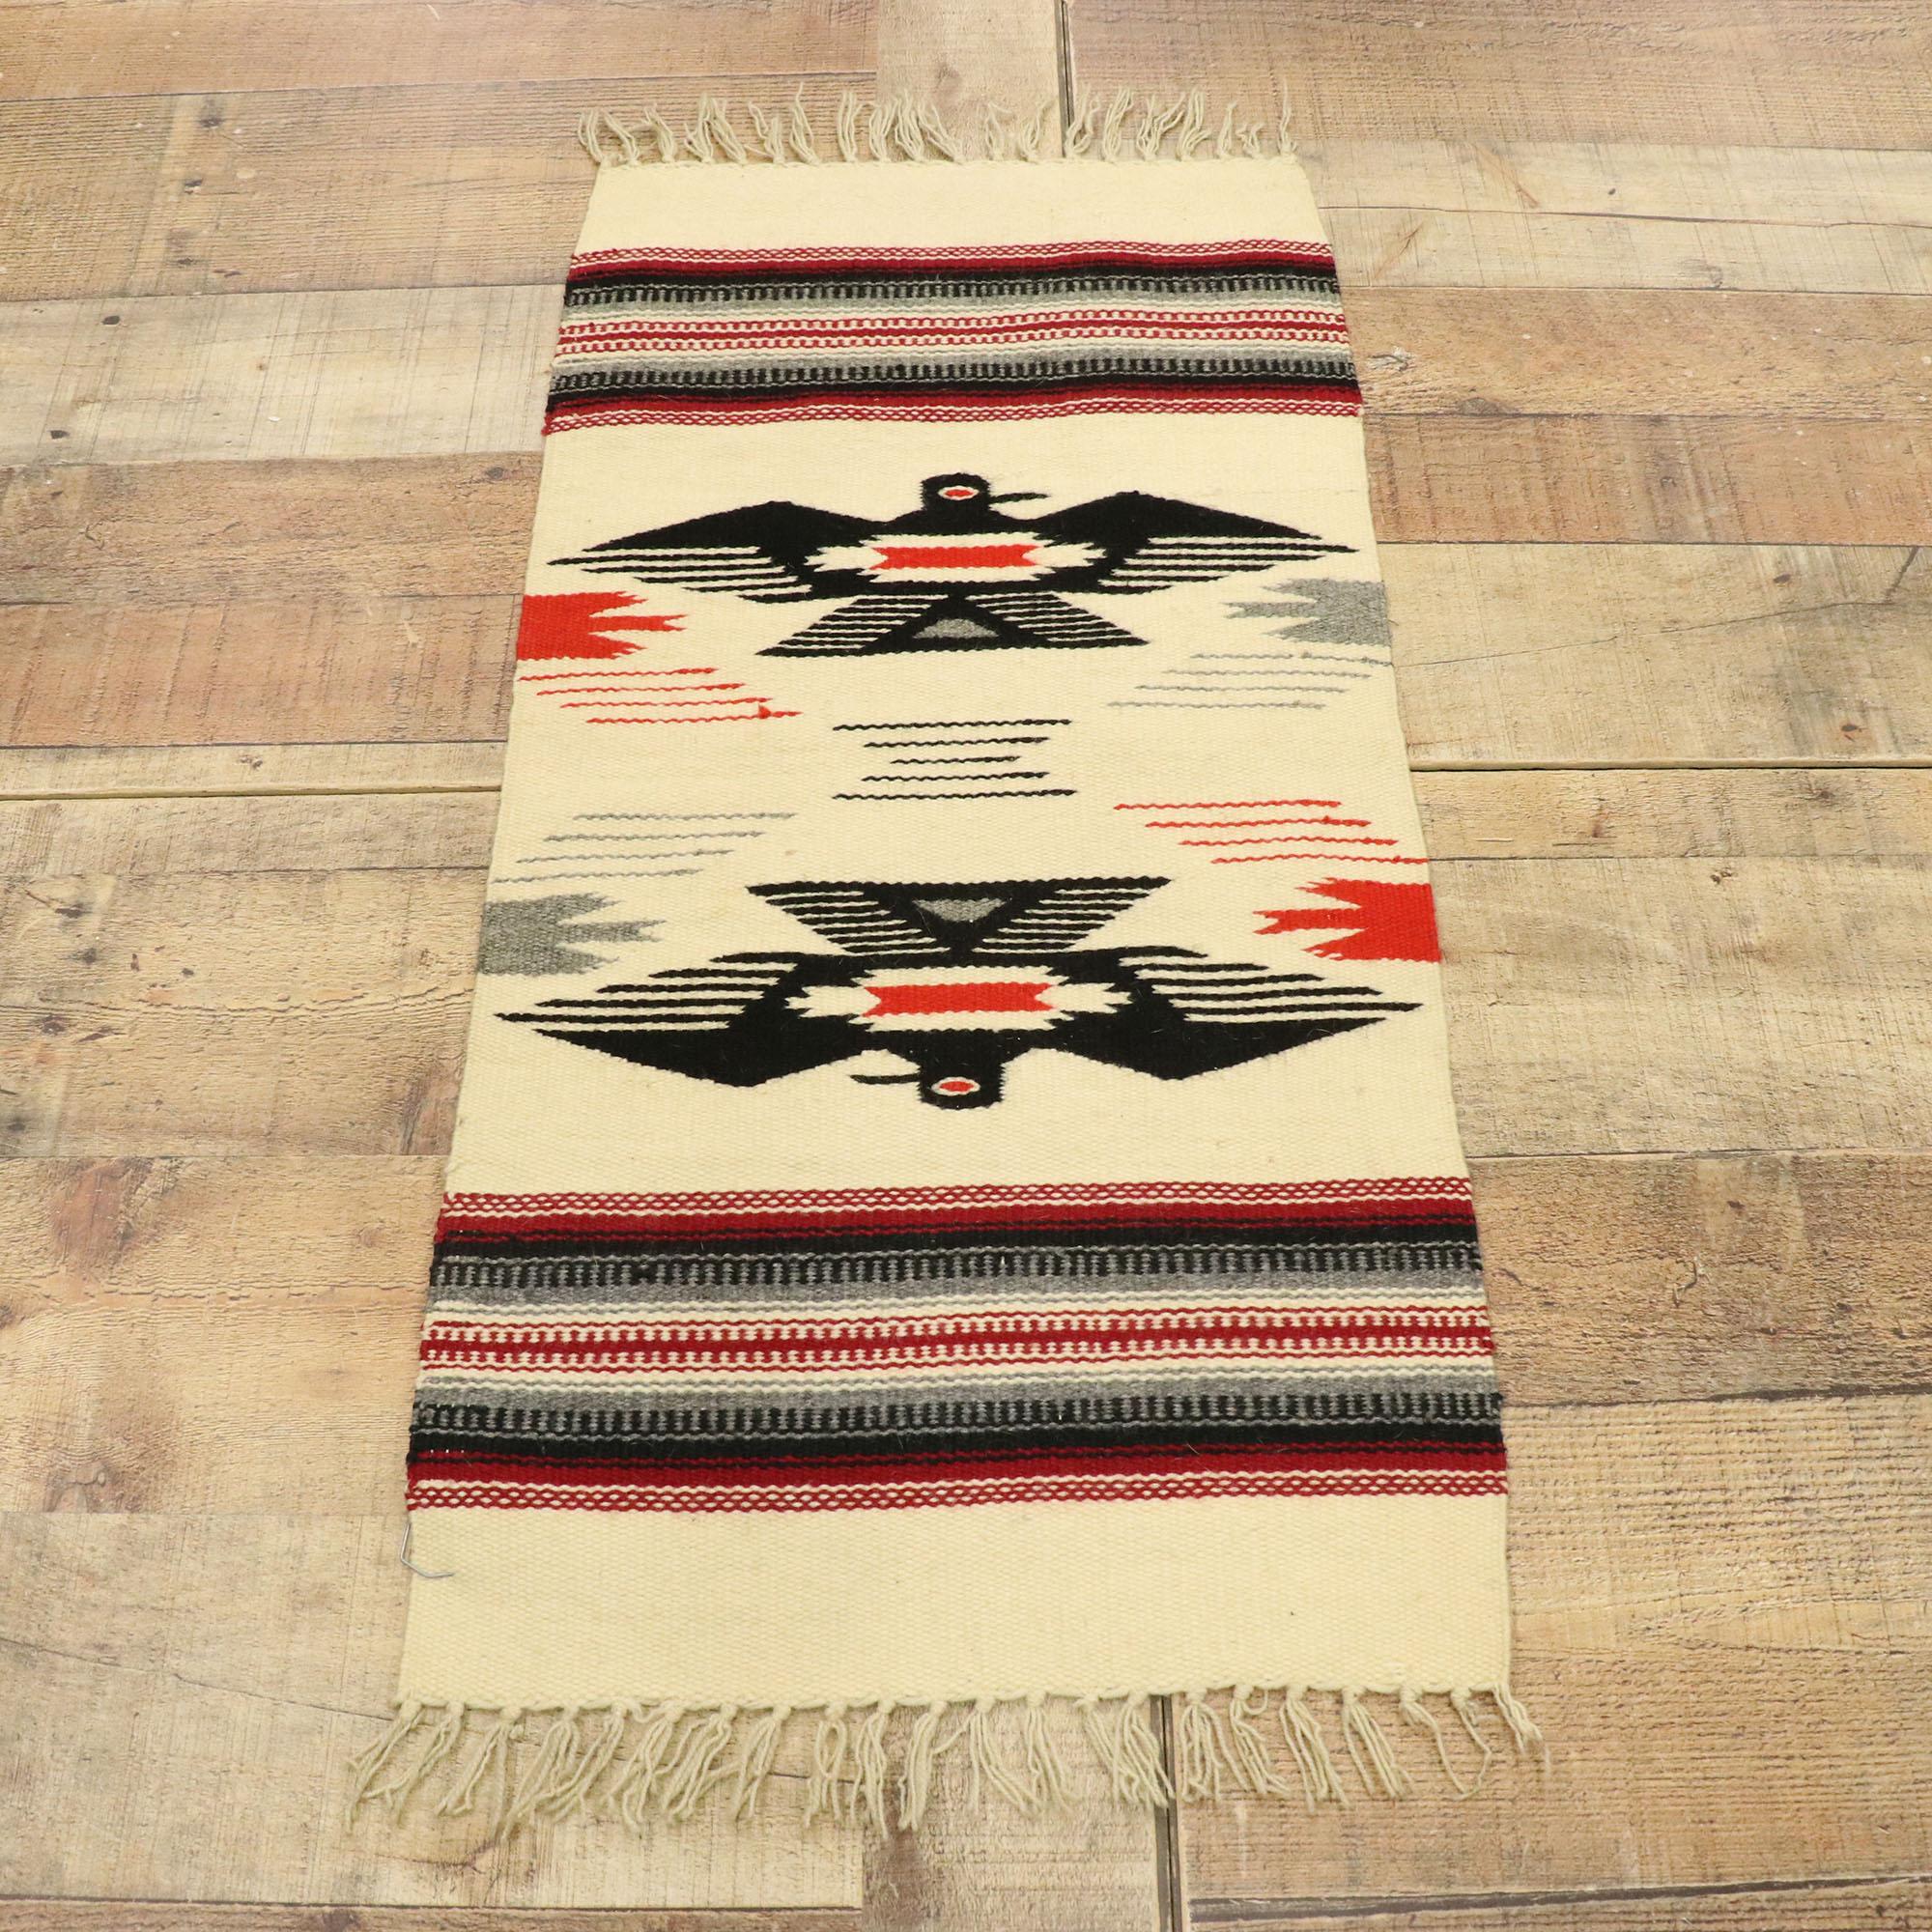 Hand-Woven Vintage Mexican Throw Blanket Kilim Accent Rug with Navajo Two Grey Hills Style